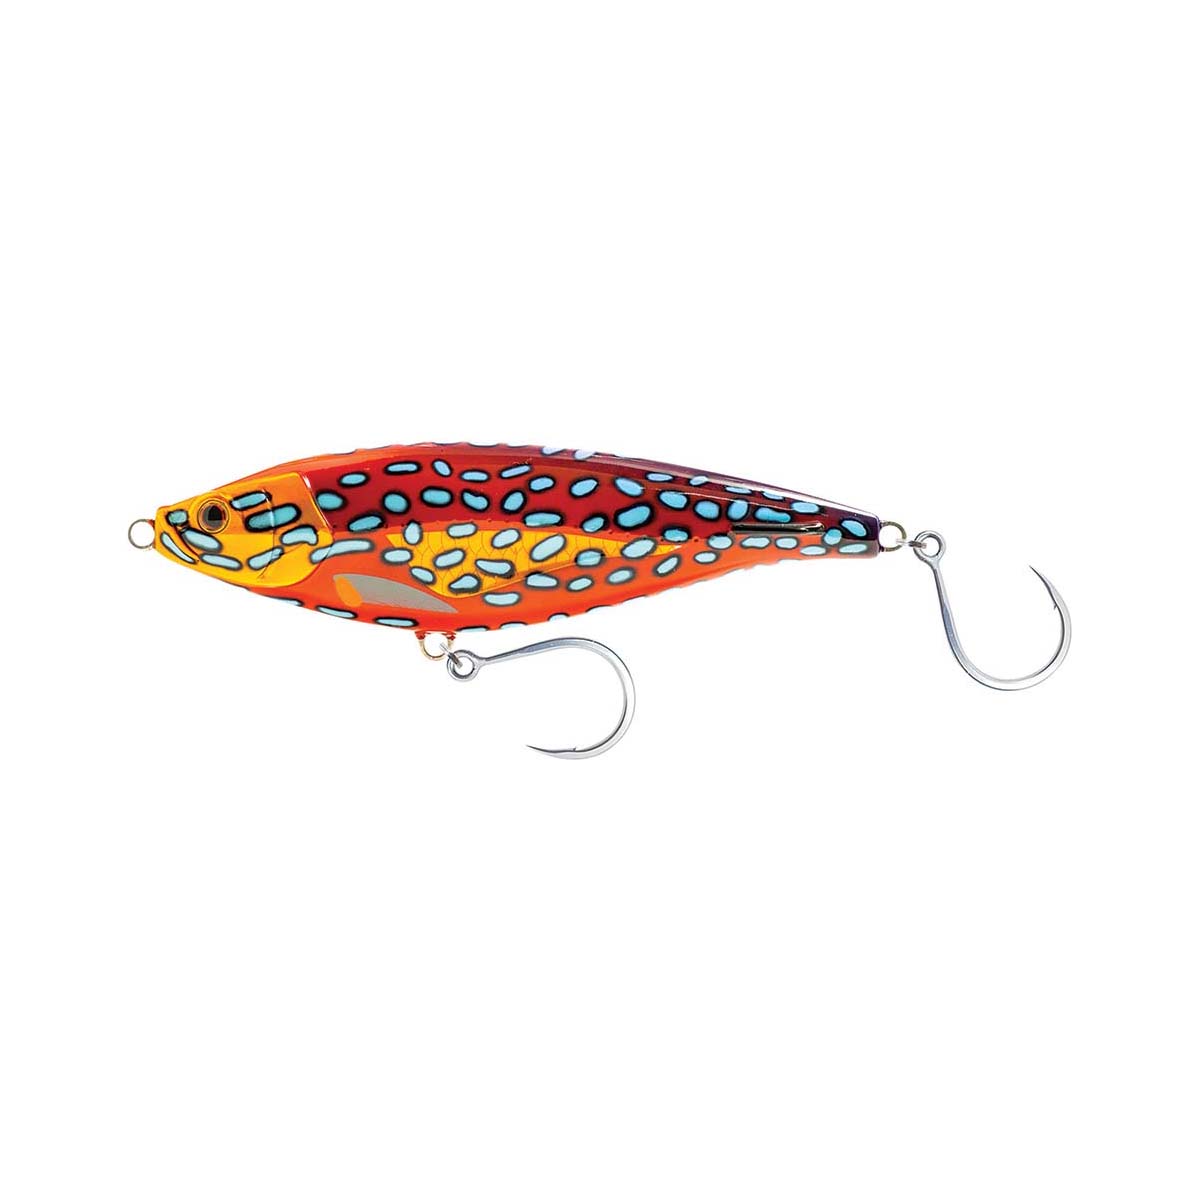 Nomad Madscad Surface Stickbait Lure 11.5cm S Coral Trout